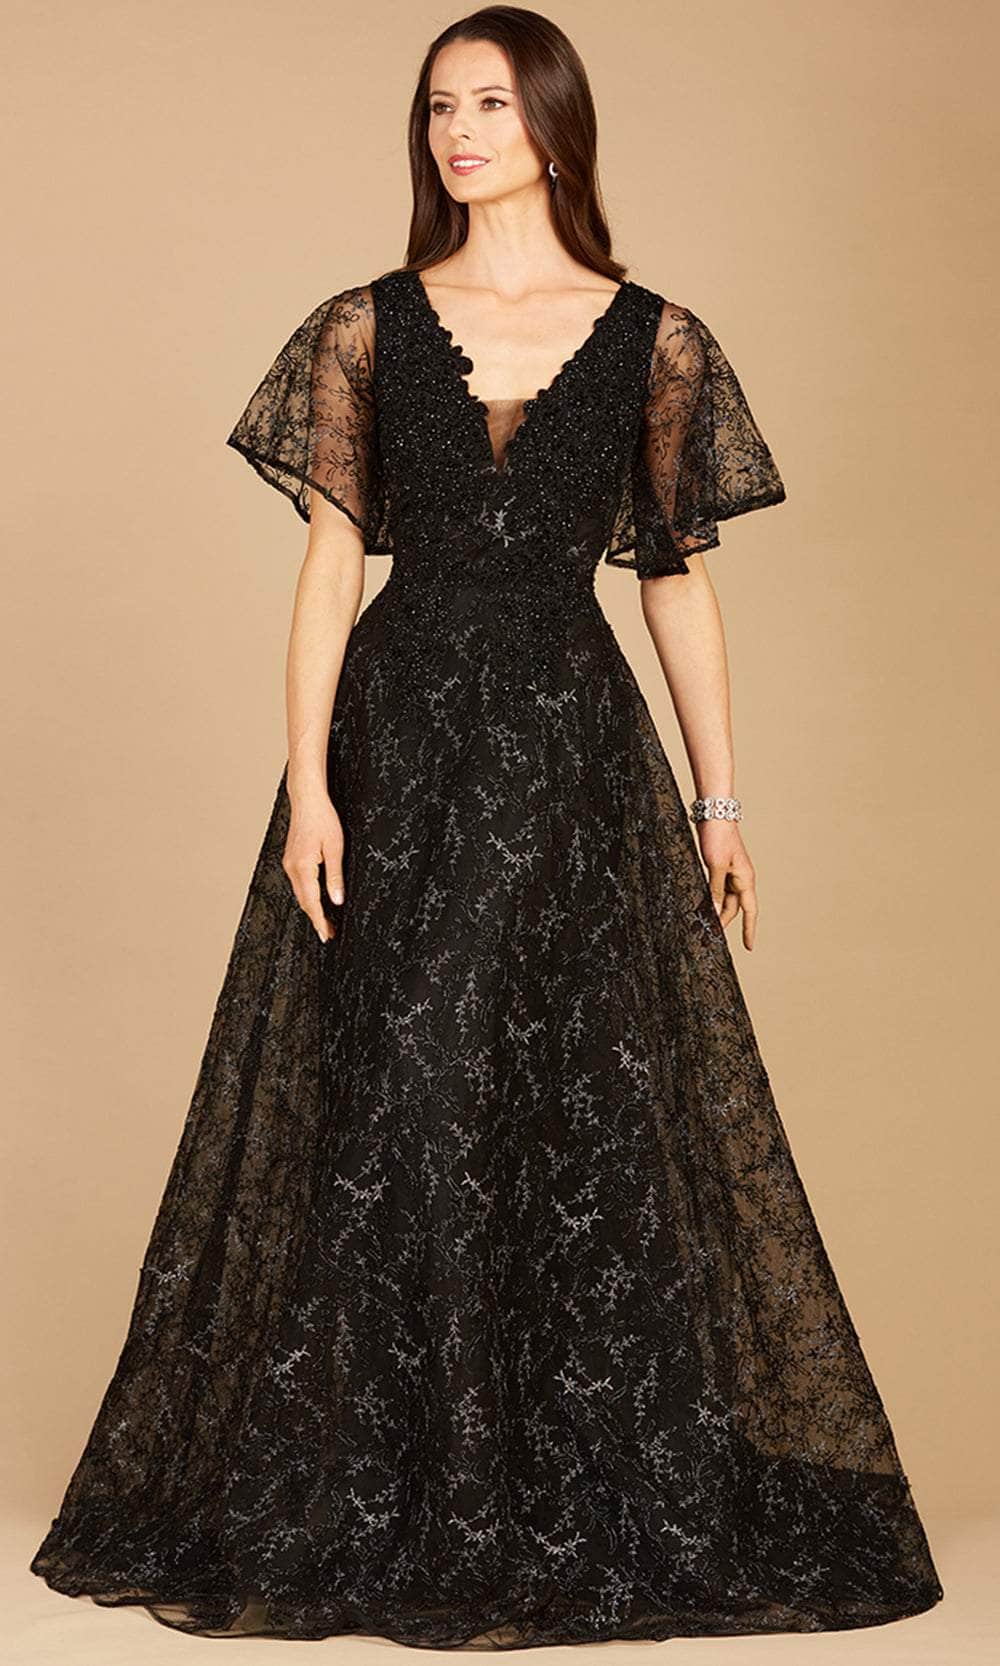 Lara Dresses 29302 - Beaded Lace Ballgown Special Occasion Dress 4 / Black